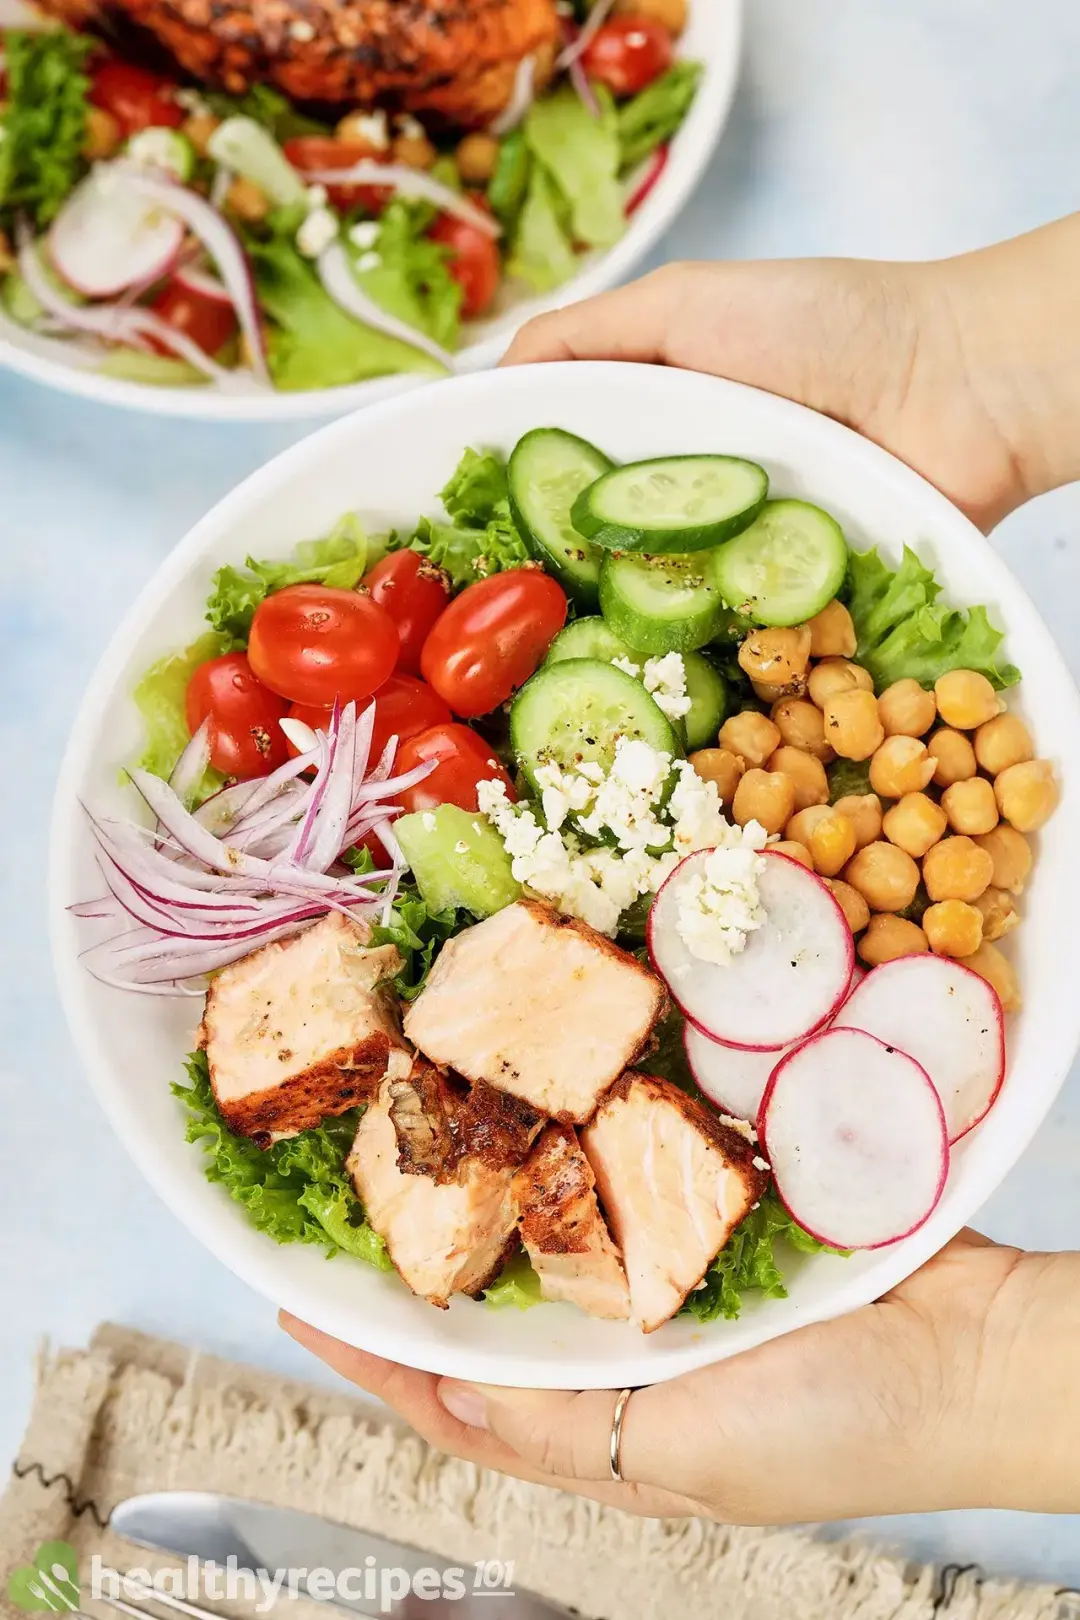 Two hands holding a plate of salad consisting of lettuce, chickpeas, sliced radish, sliced cucumbers, cherry tomatoes, red onion, and pan-seared salmon cubes